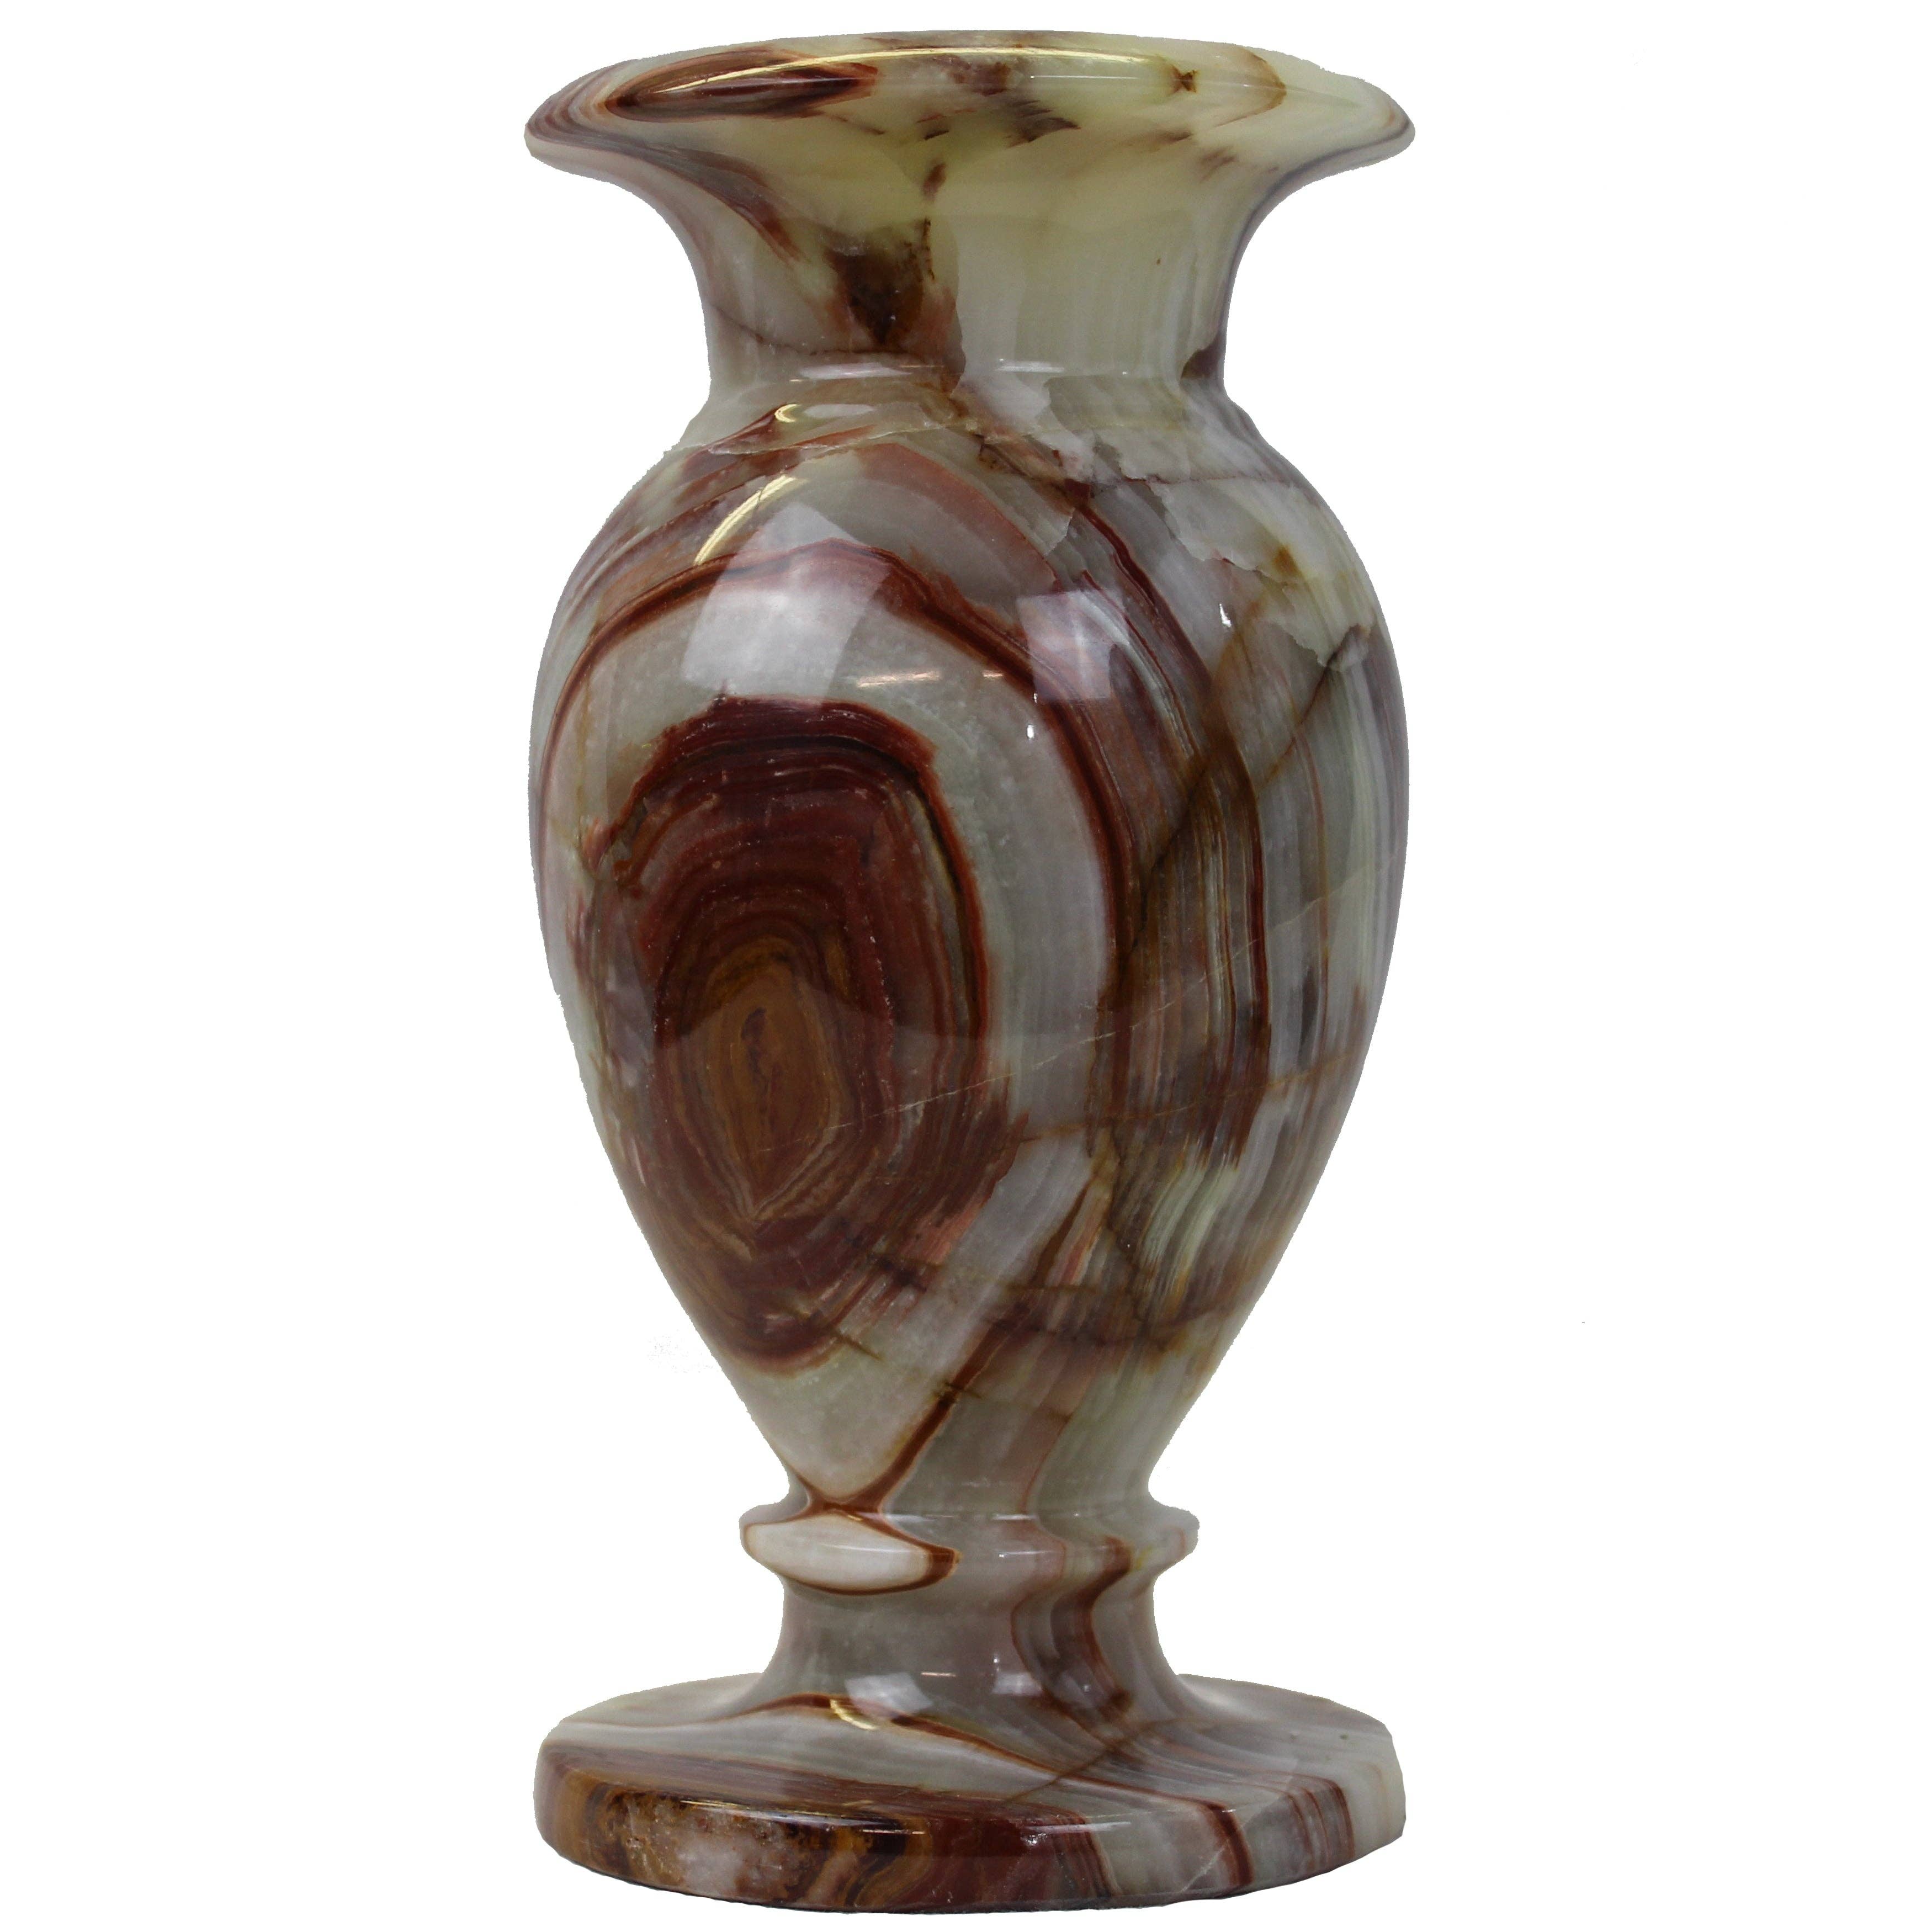 Multicolored Decorative Handcrafted 8" Onyx Vase